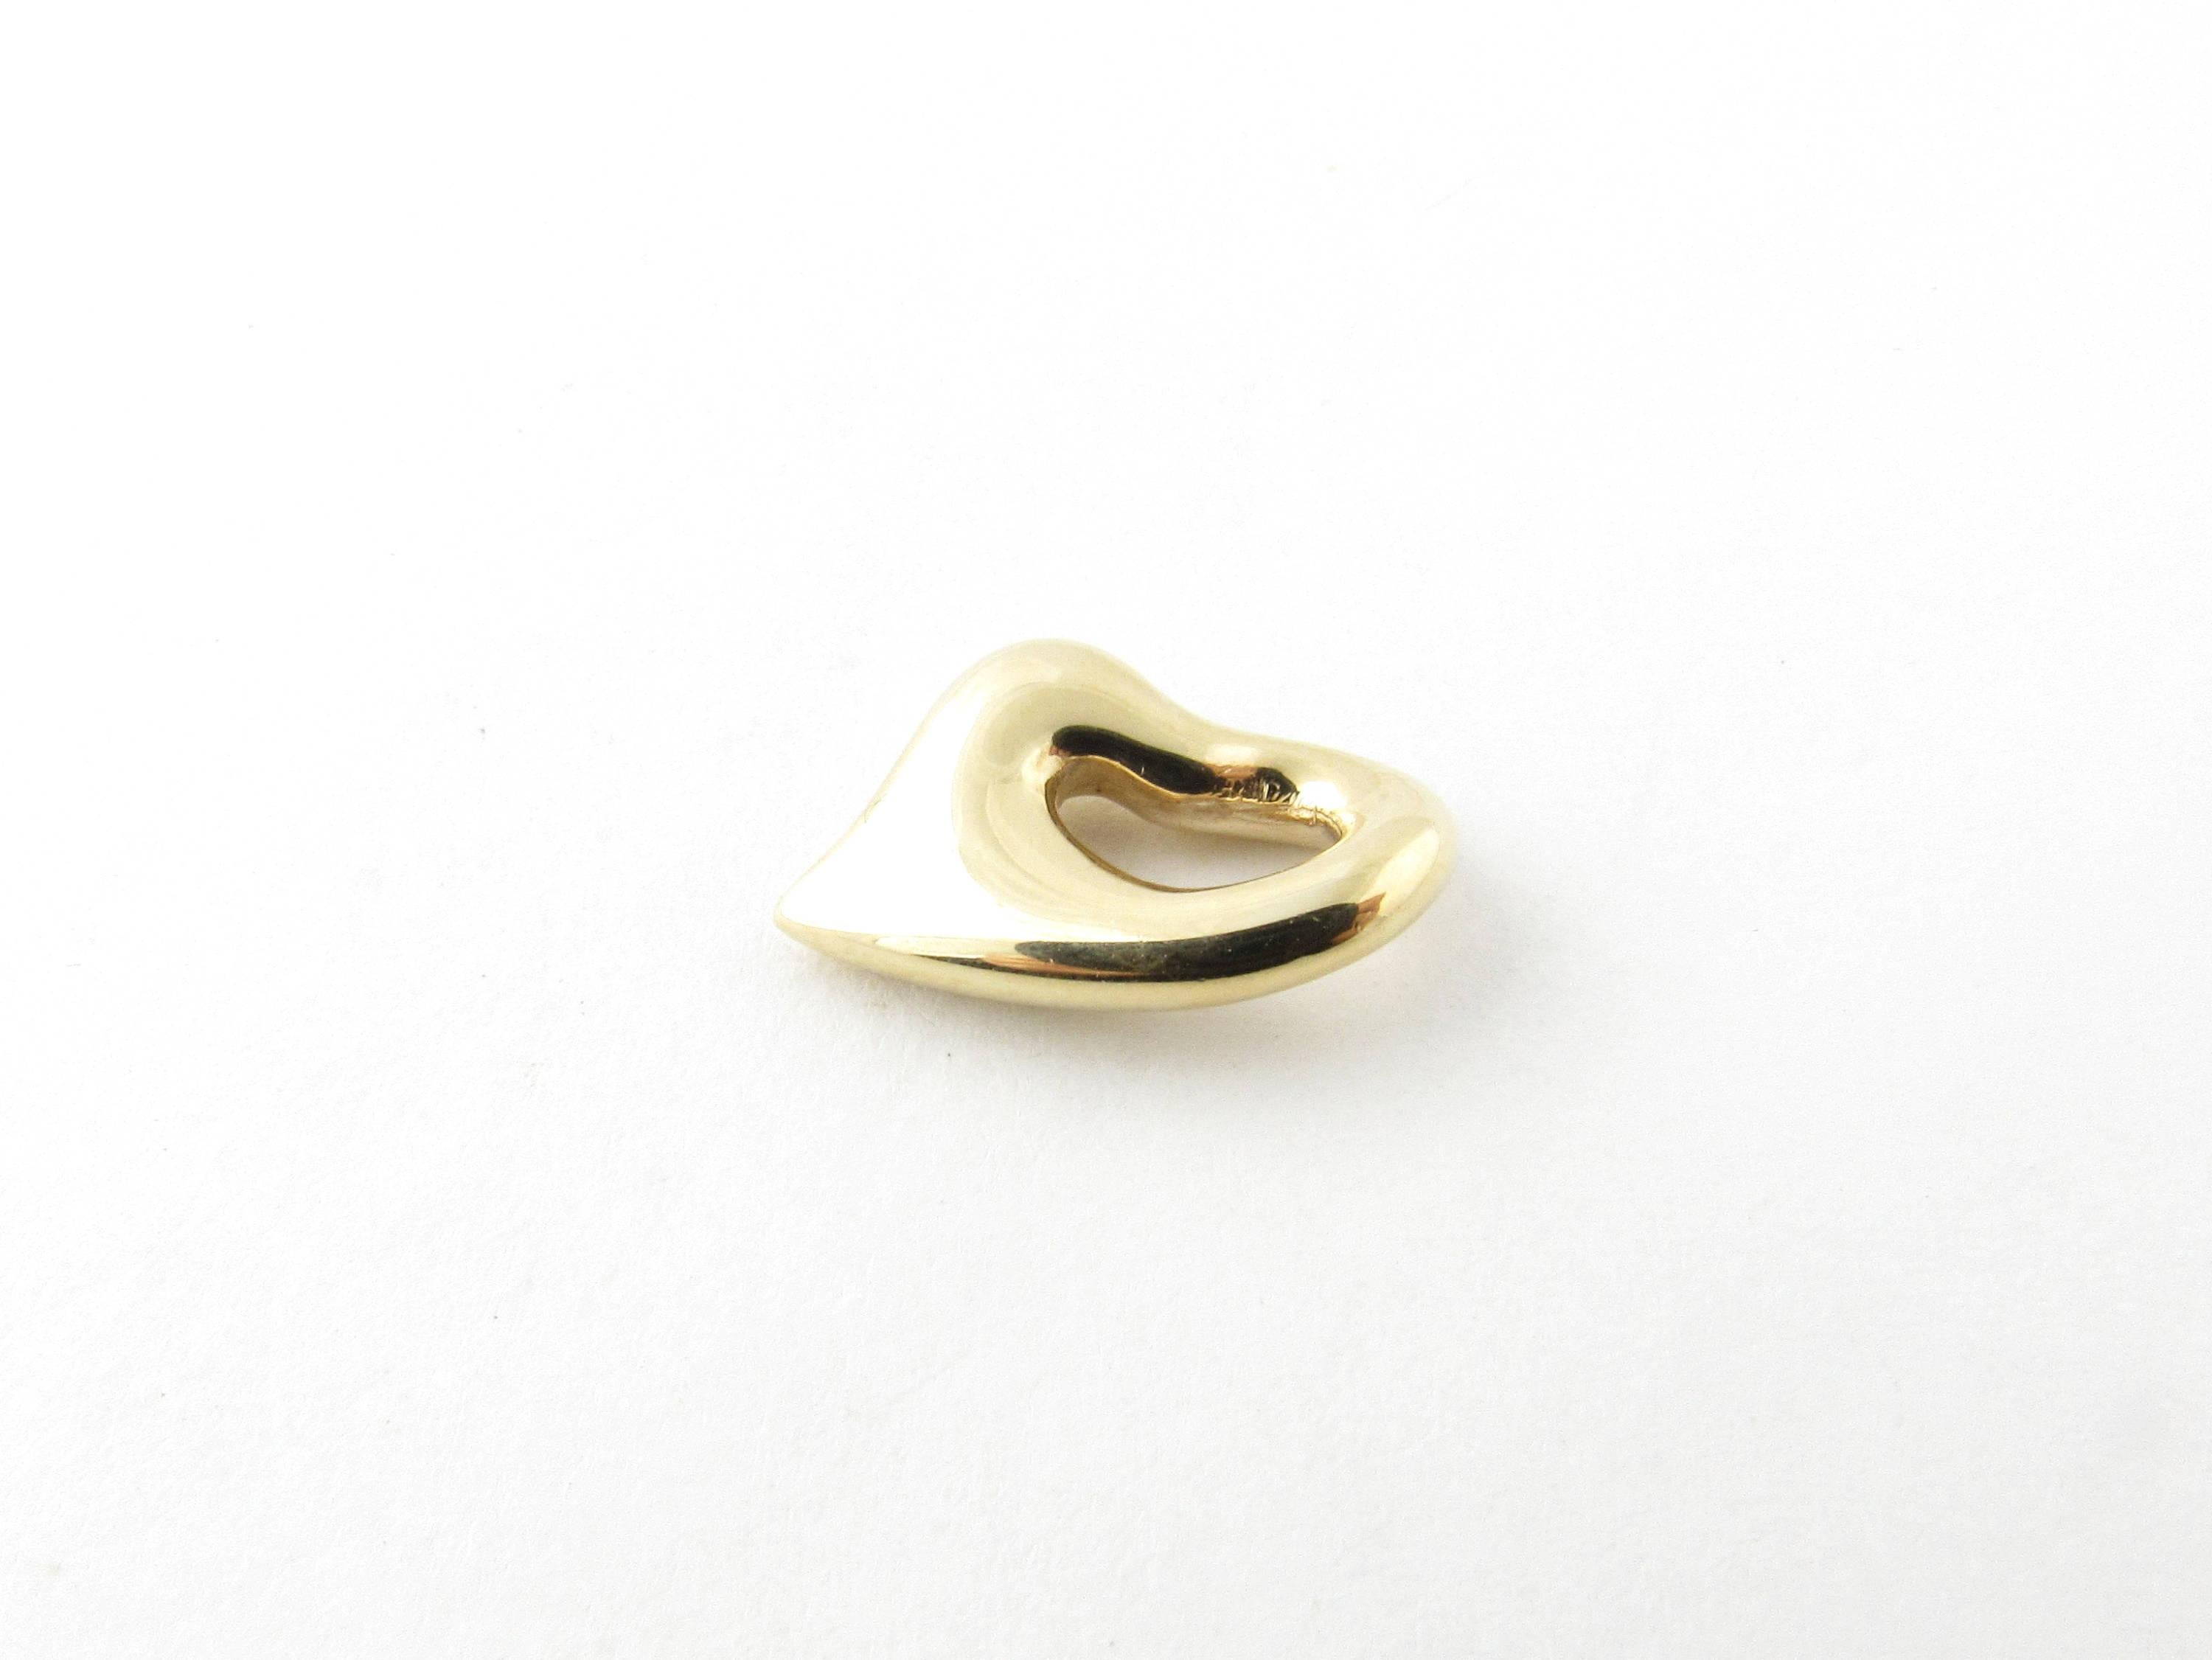 Vintage 14 Karat Yellow Gold Heart Pendant- 
This romantic pendant features an abstract open heart beautifully crafted in polished 14K yellow gold. 
Size: 16 mm x 13 mm 
Weight: 1.9 dwt. / 3.0 gr. 
Hallmark: 14K CIANI 
Very good condition,